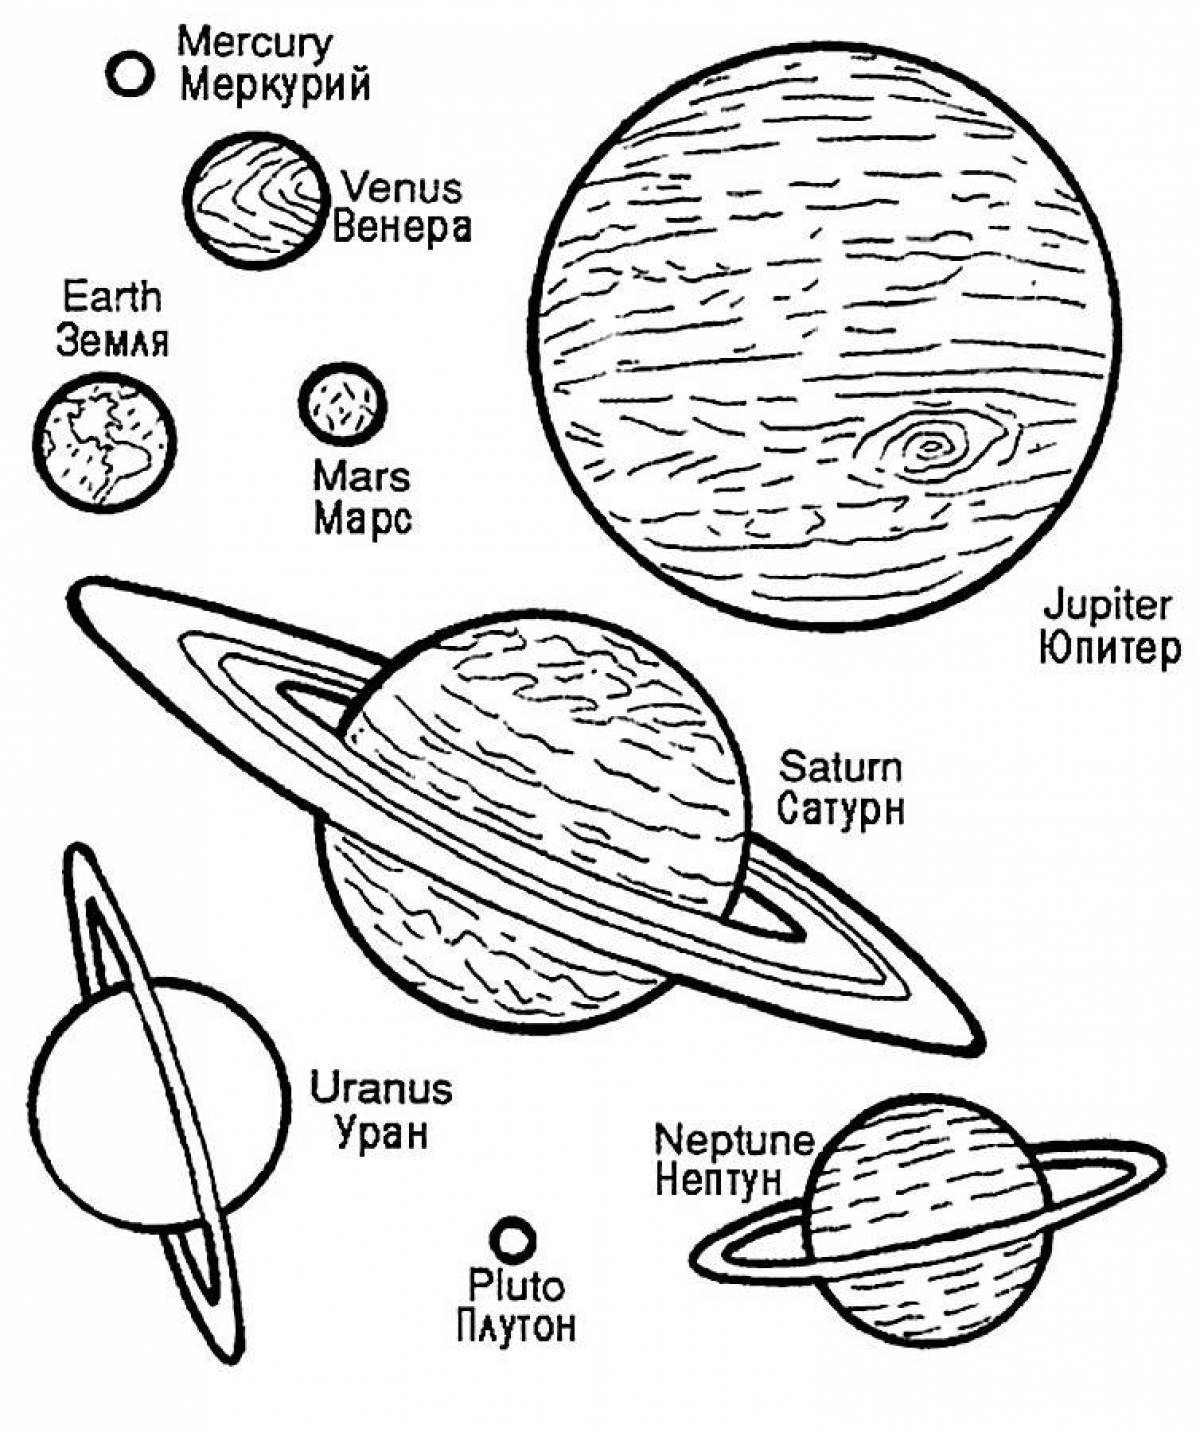 Vibrant coloring of the planets of the solar system for children